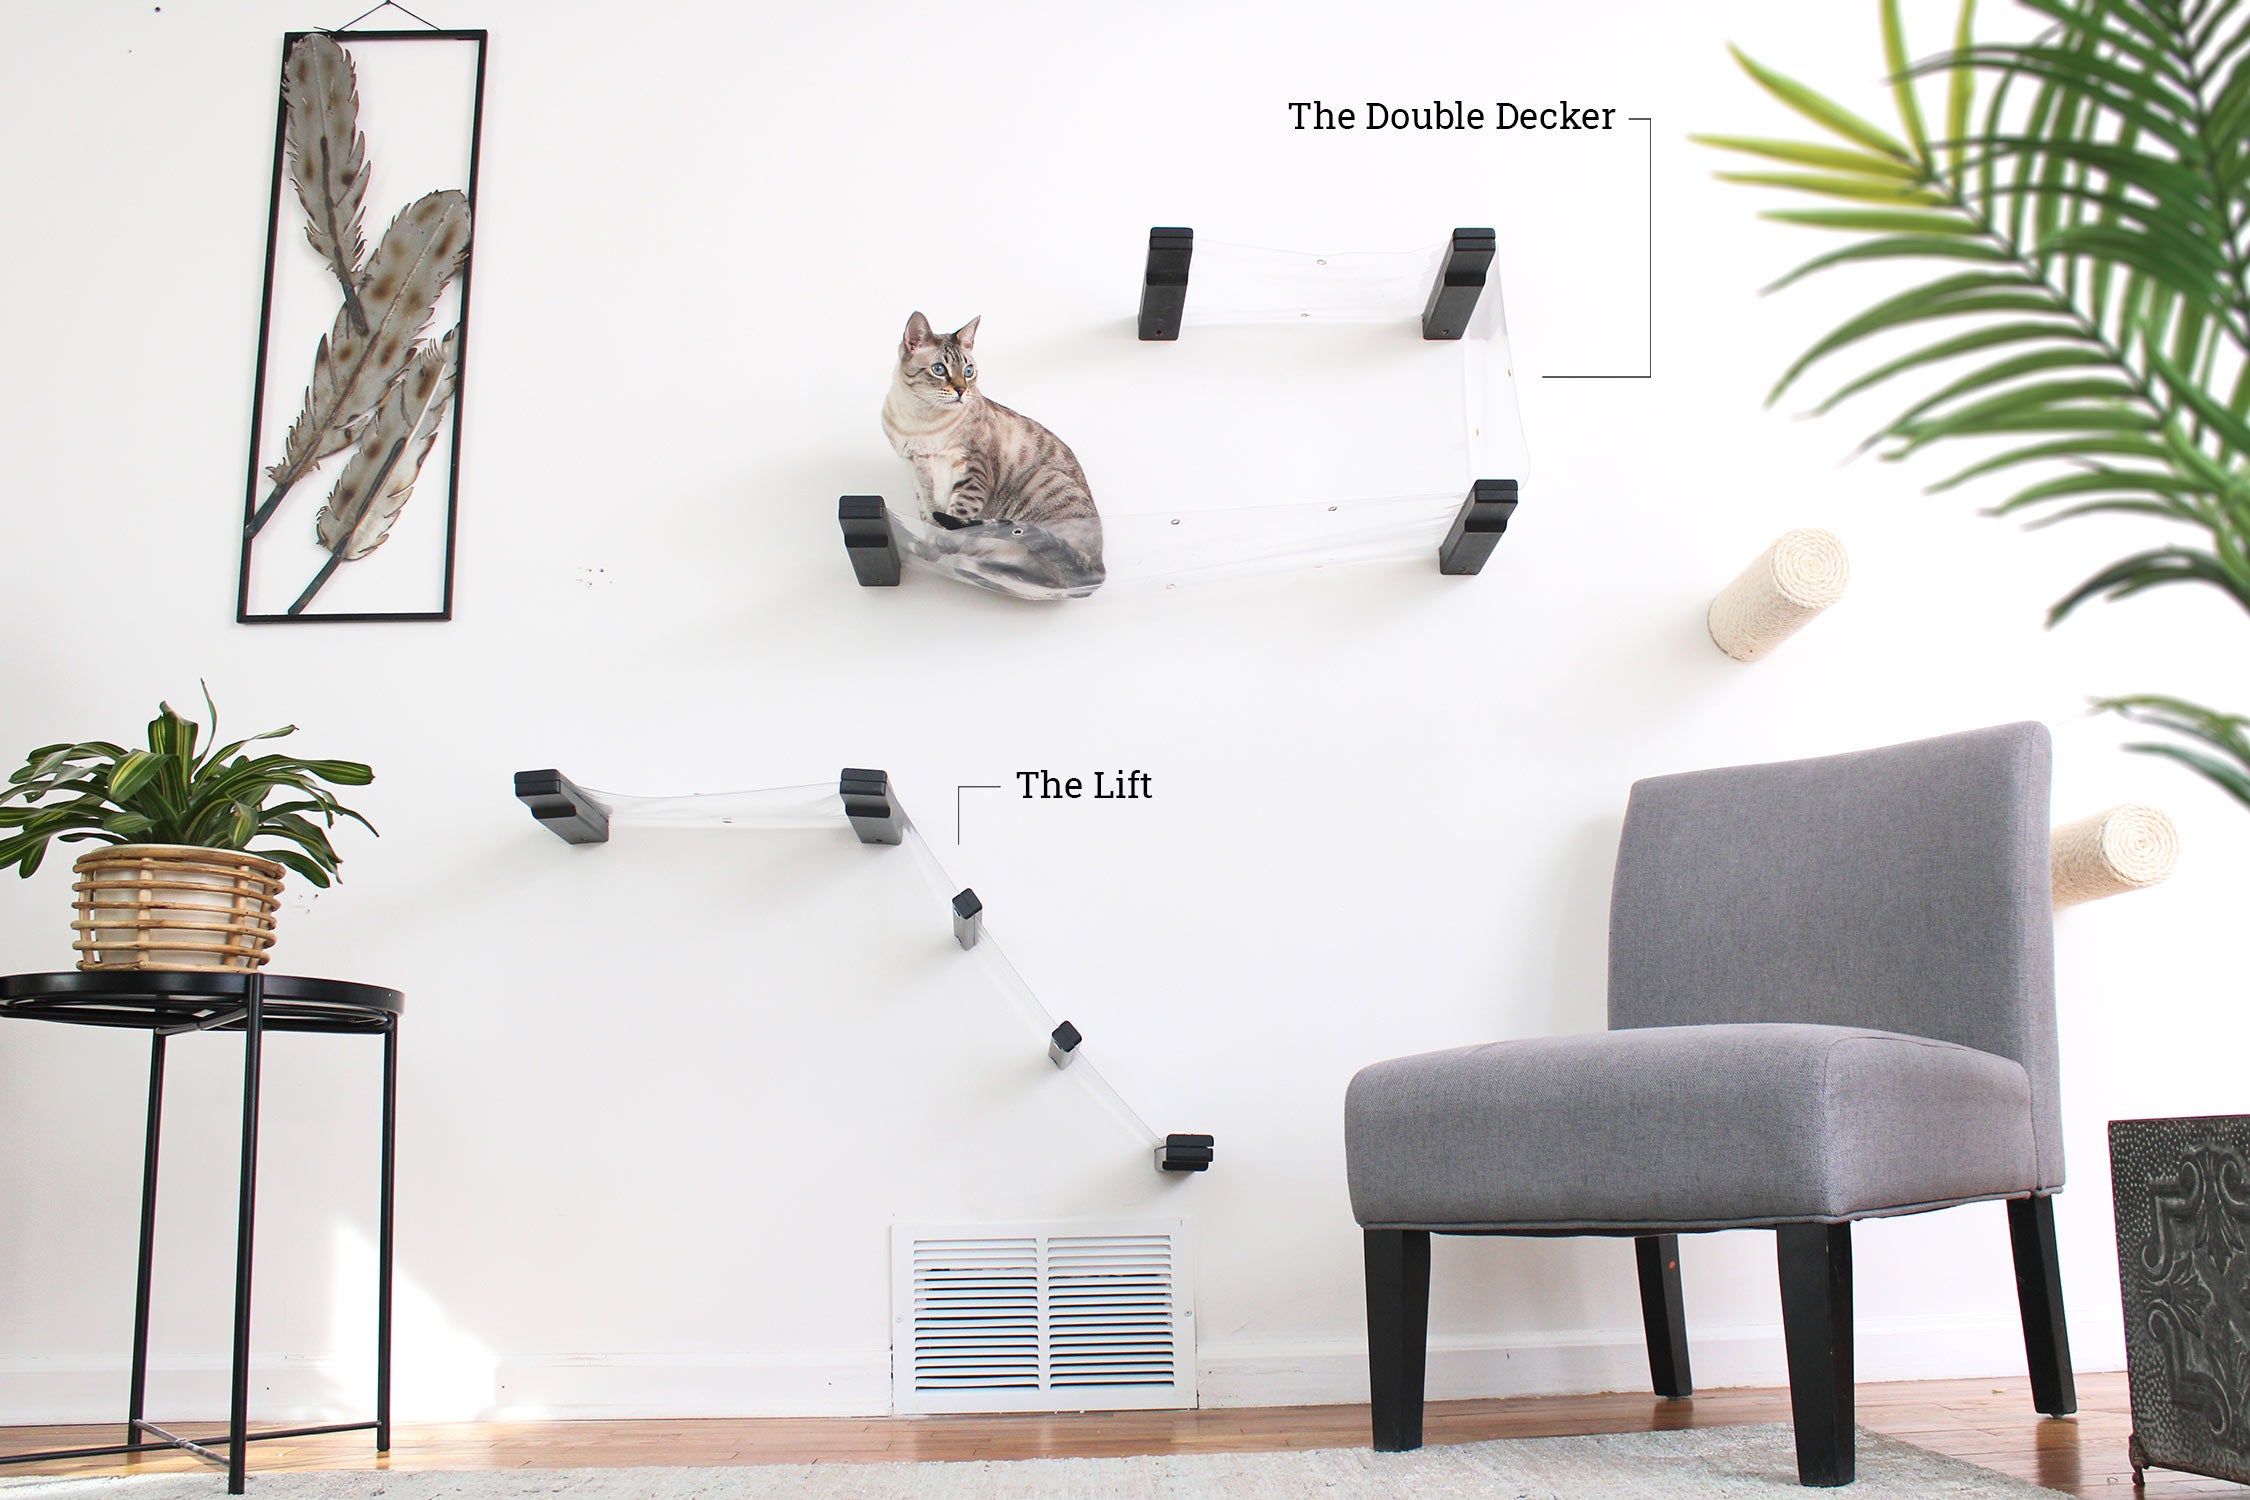 The Lift and Double Decker Invisible Cat Hammocks on a wall with art and plants